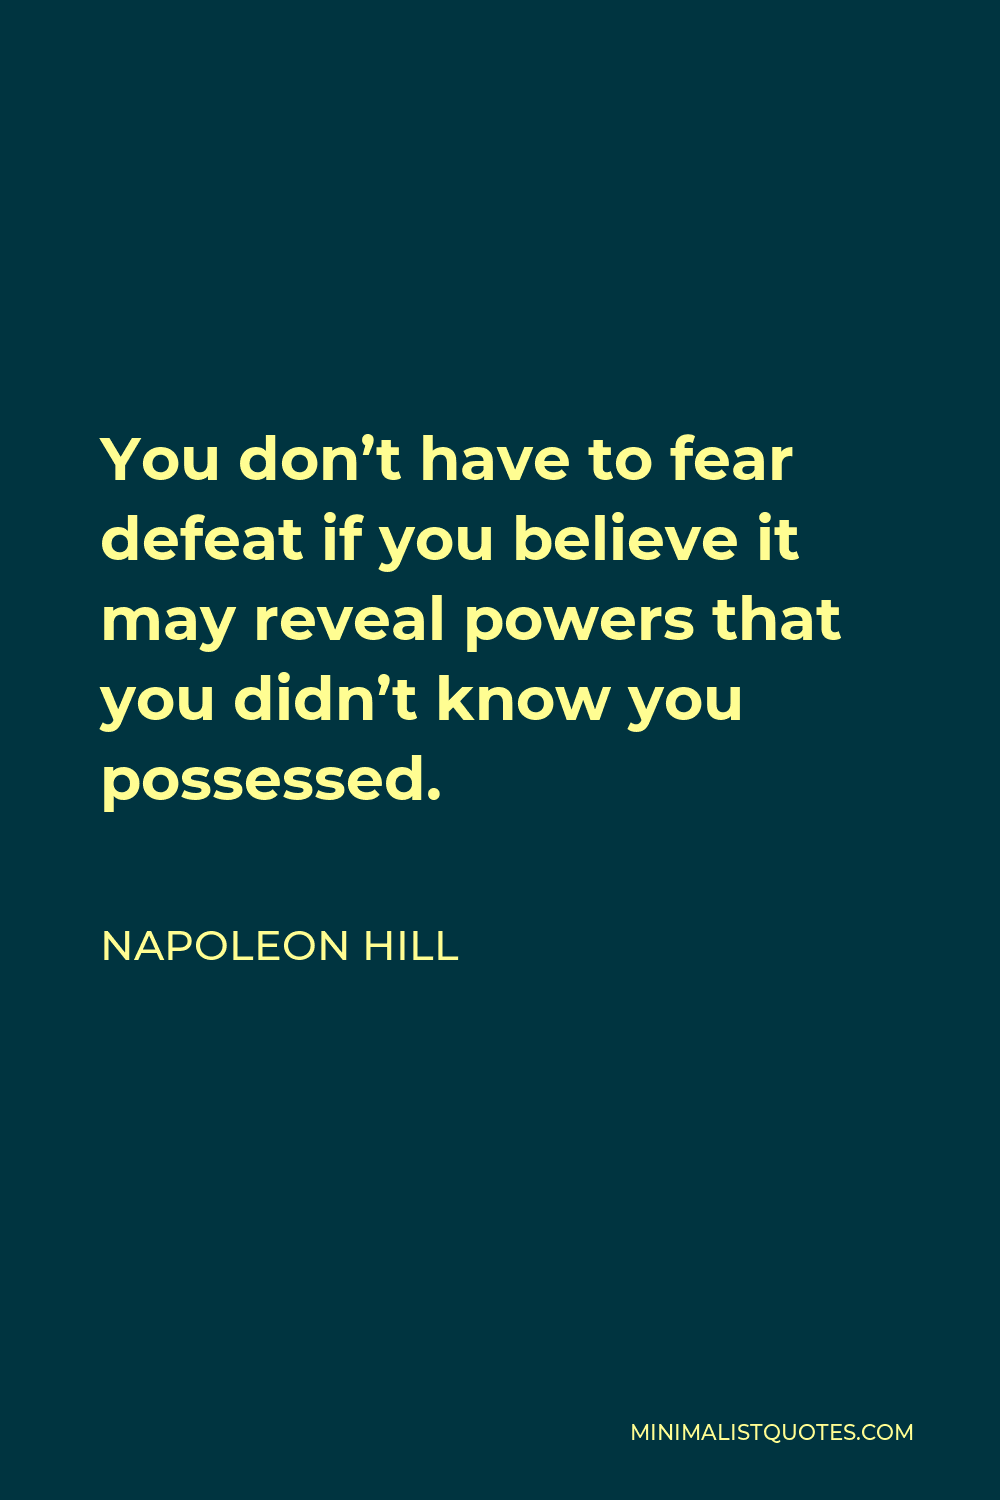 Napoleon Hill Quote - You don’t have to fear defeat if you believe it may reveal powers that you didn’t know you possessed.